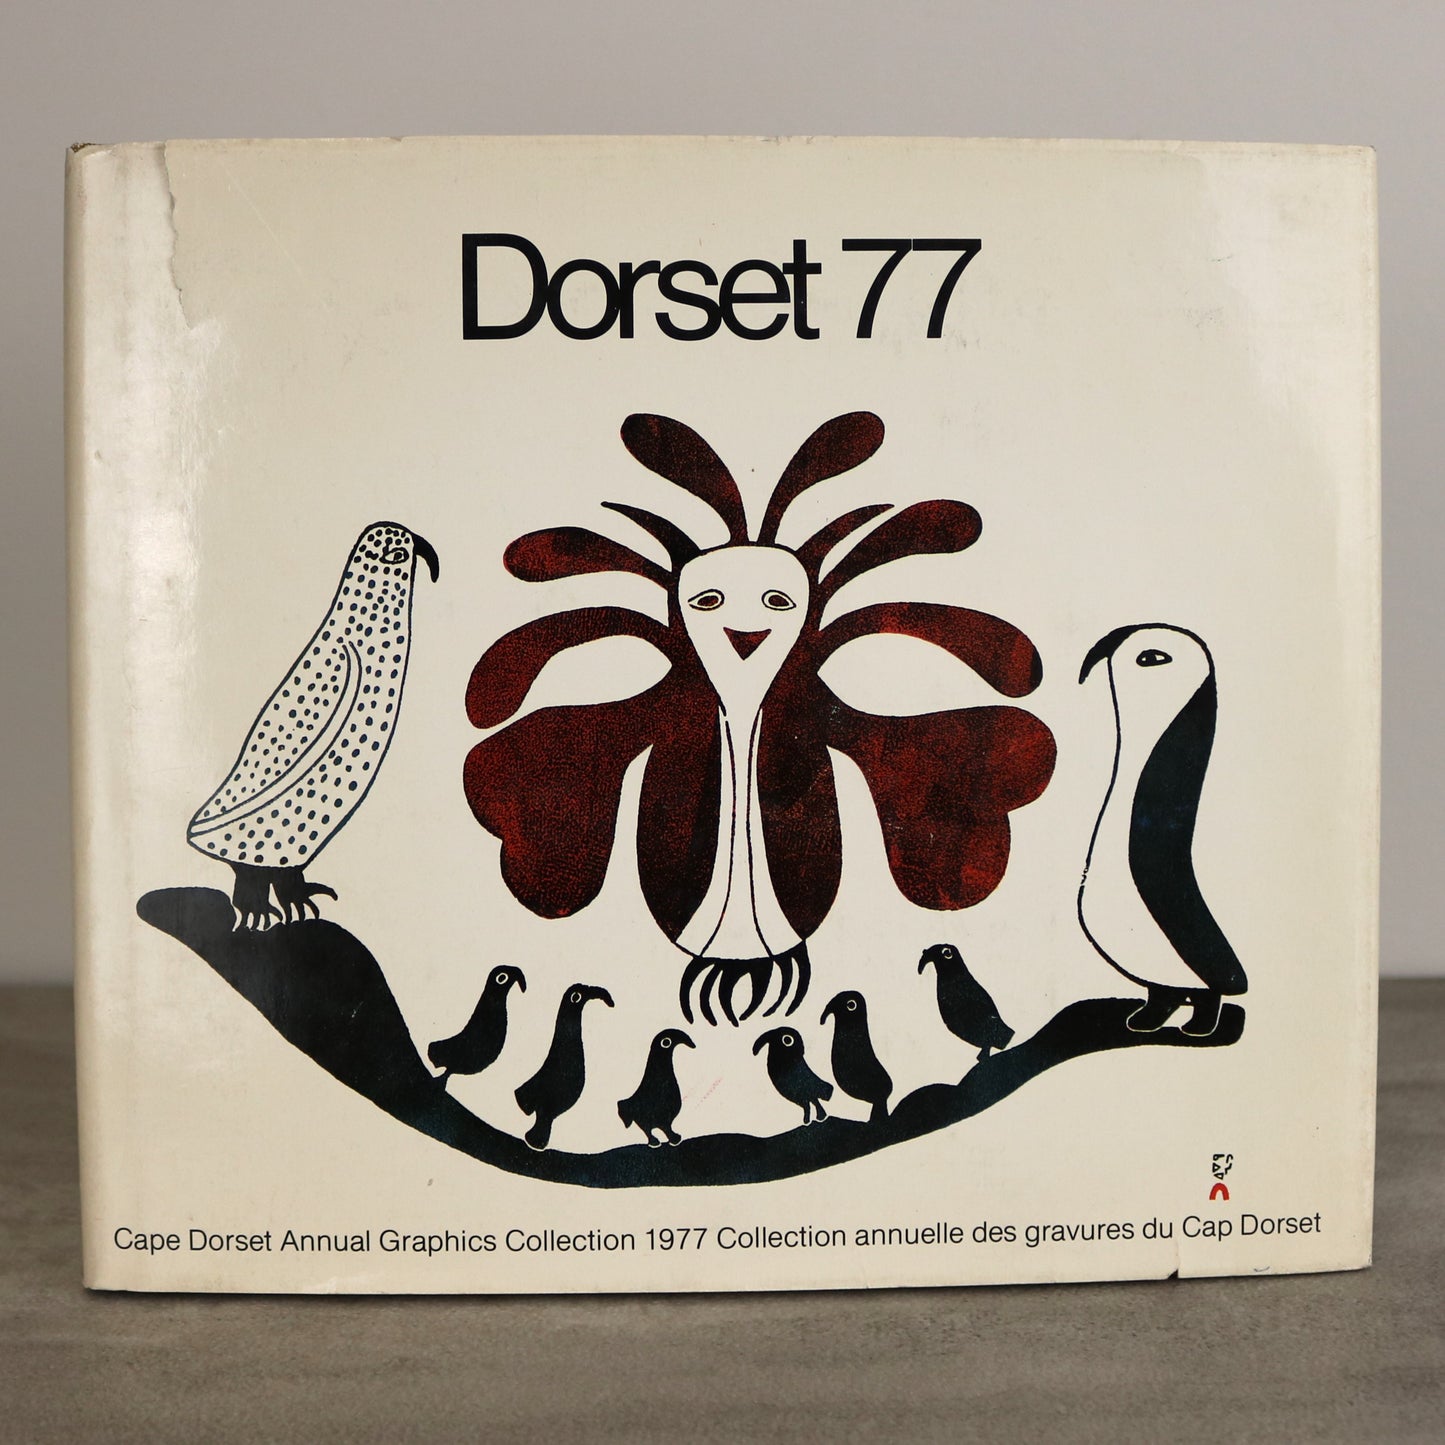 Dorset 77 Annual Graphics Collection Indigenous Art Printmaking Used Book